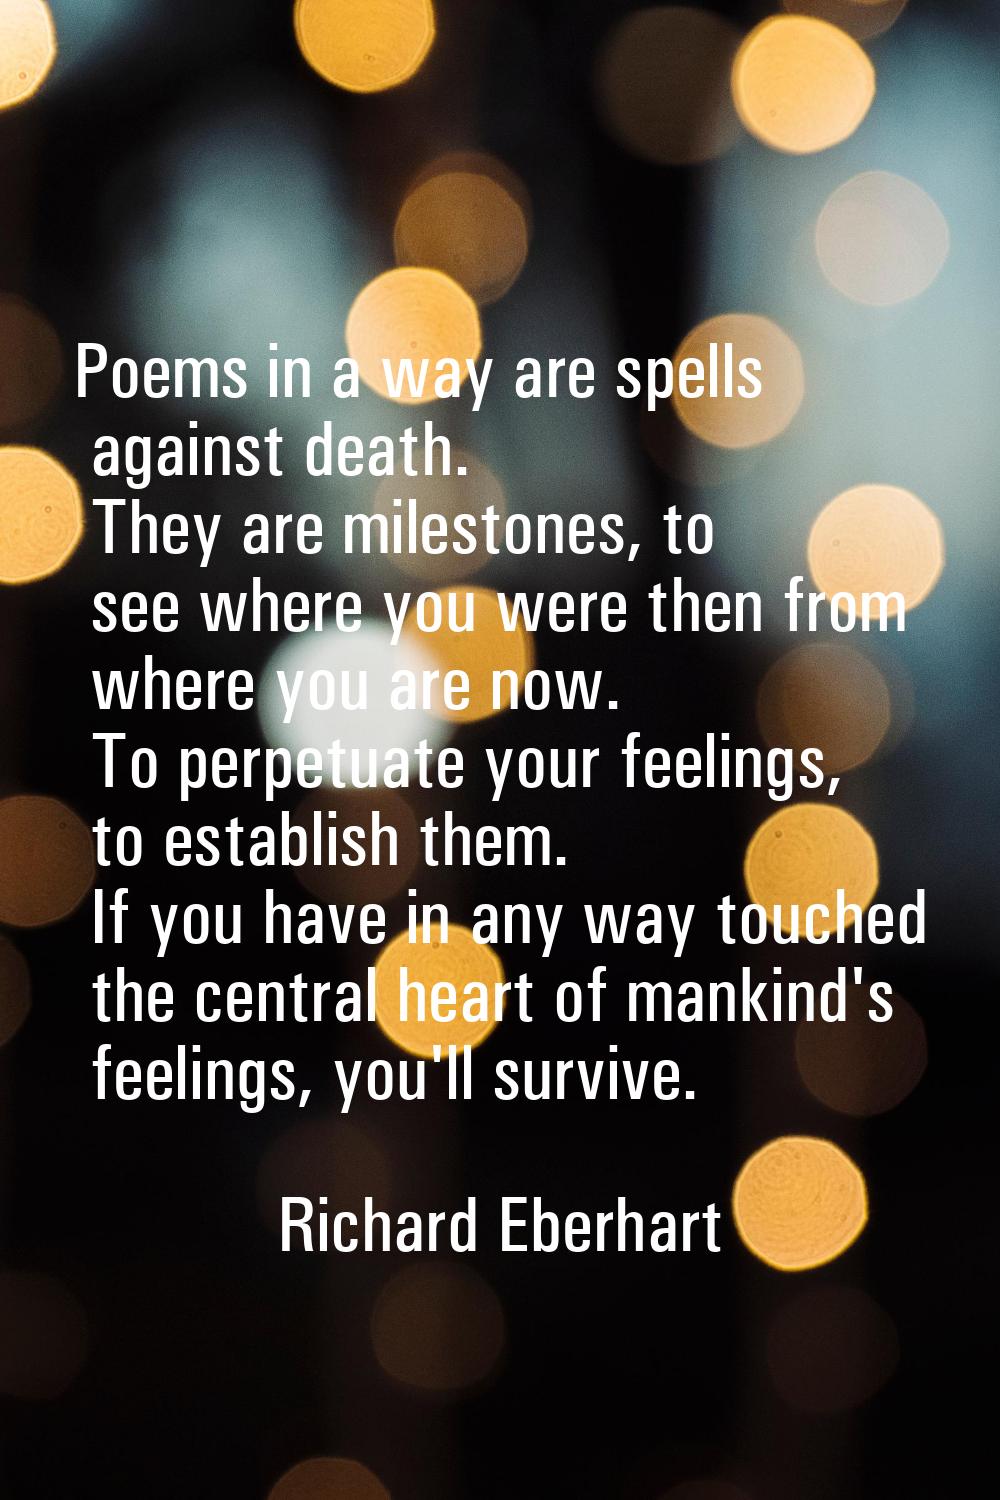 Poems in a way are spells against death. They are milestones, to see where you were then from where